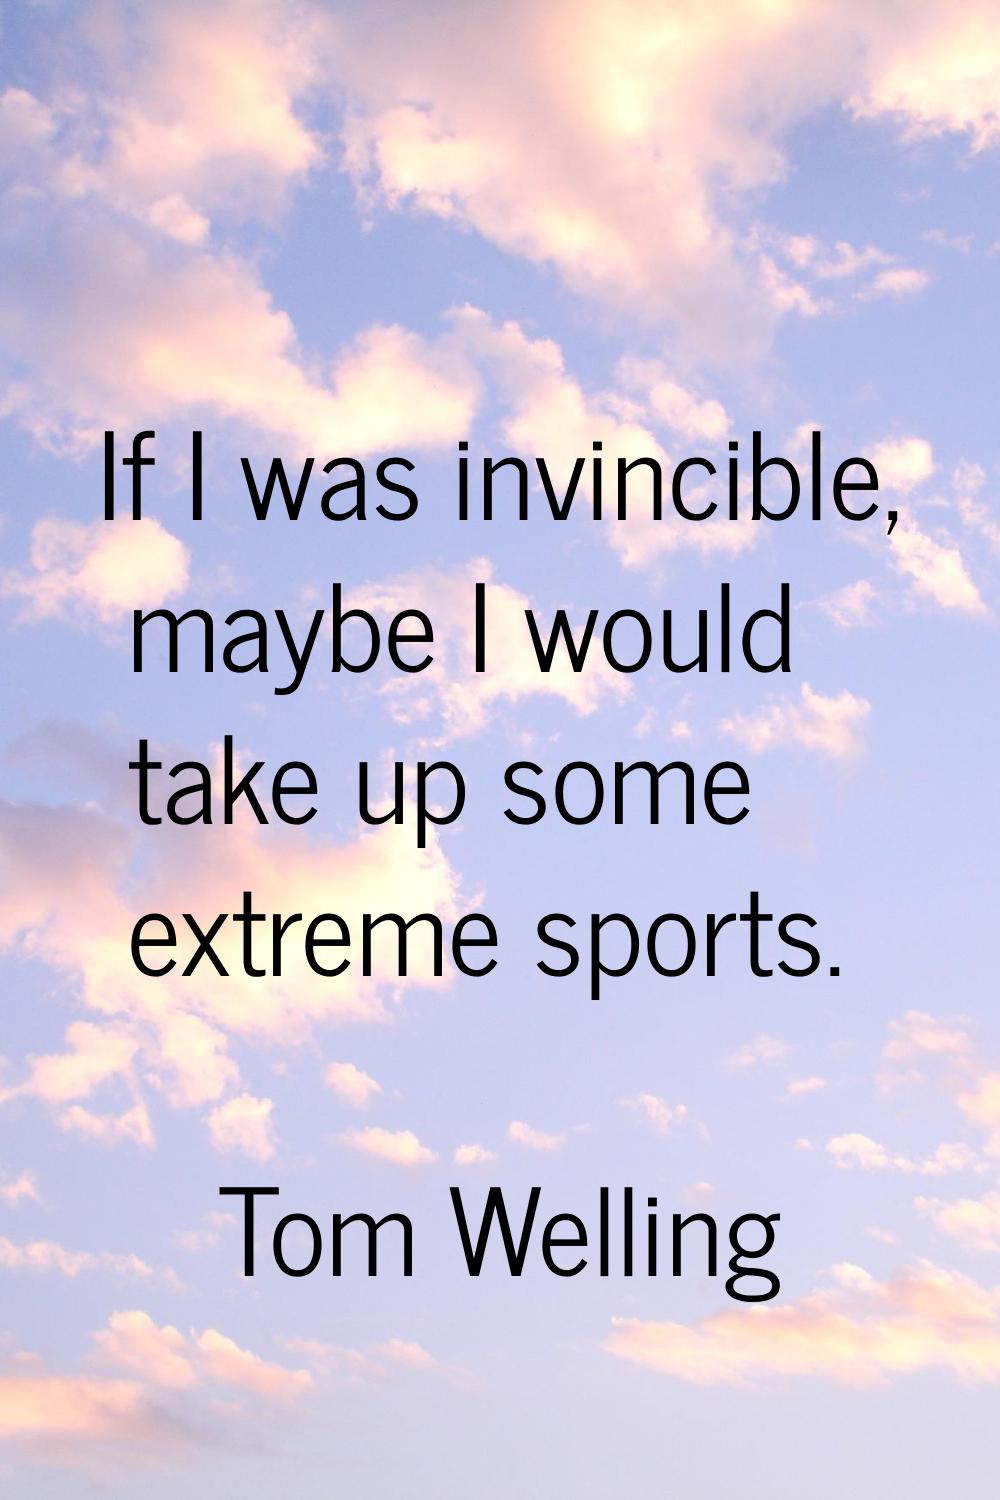 If I was invincible, maybe I would take up some extreme sports.